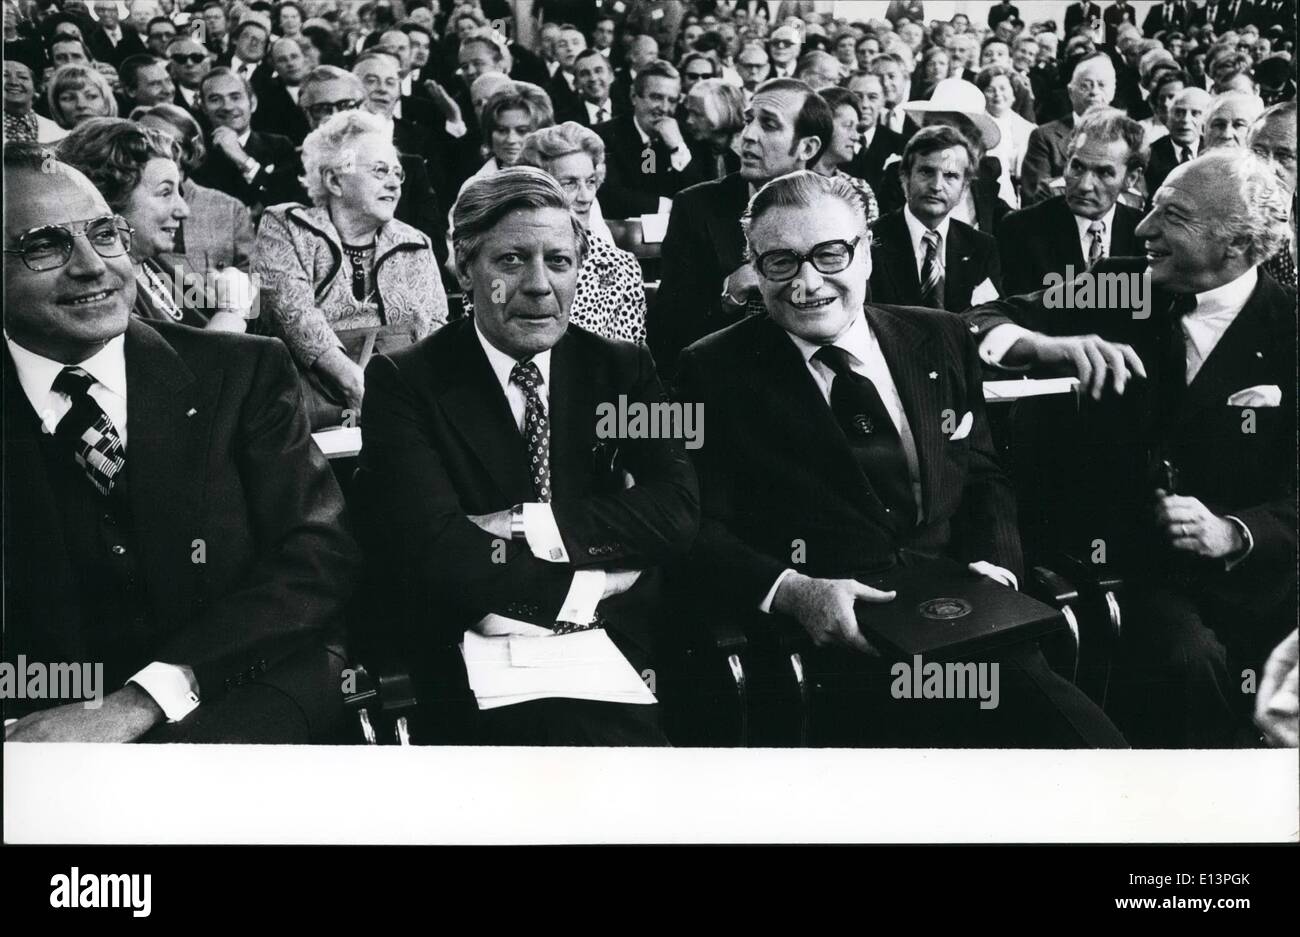 Mar. 22, 2012 - US Vice-President Nelson Rockefeller Visited Frankfurt And Berlin For two days now the American Vice-President Nelson Rockefeller - accompanied by his wife ''Happy'' - came into the Federal Republic of Germany. He visited Berlin and also Frankfurt/Main, where in the famous Paulskirche was held an anniversary-ceremony because of the United States of America. OPS: Helmut Kohl, nominated Chancellor-candidate of the CDU/CSU, Chancellor Helmut Schmidt, US Vice-President Nelson Rockefeller and the President of the Federal Republic of Germany, Walter Scheel, (f. l Stock Photo